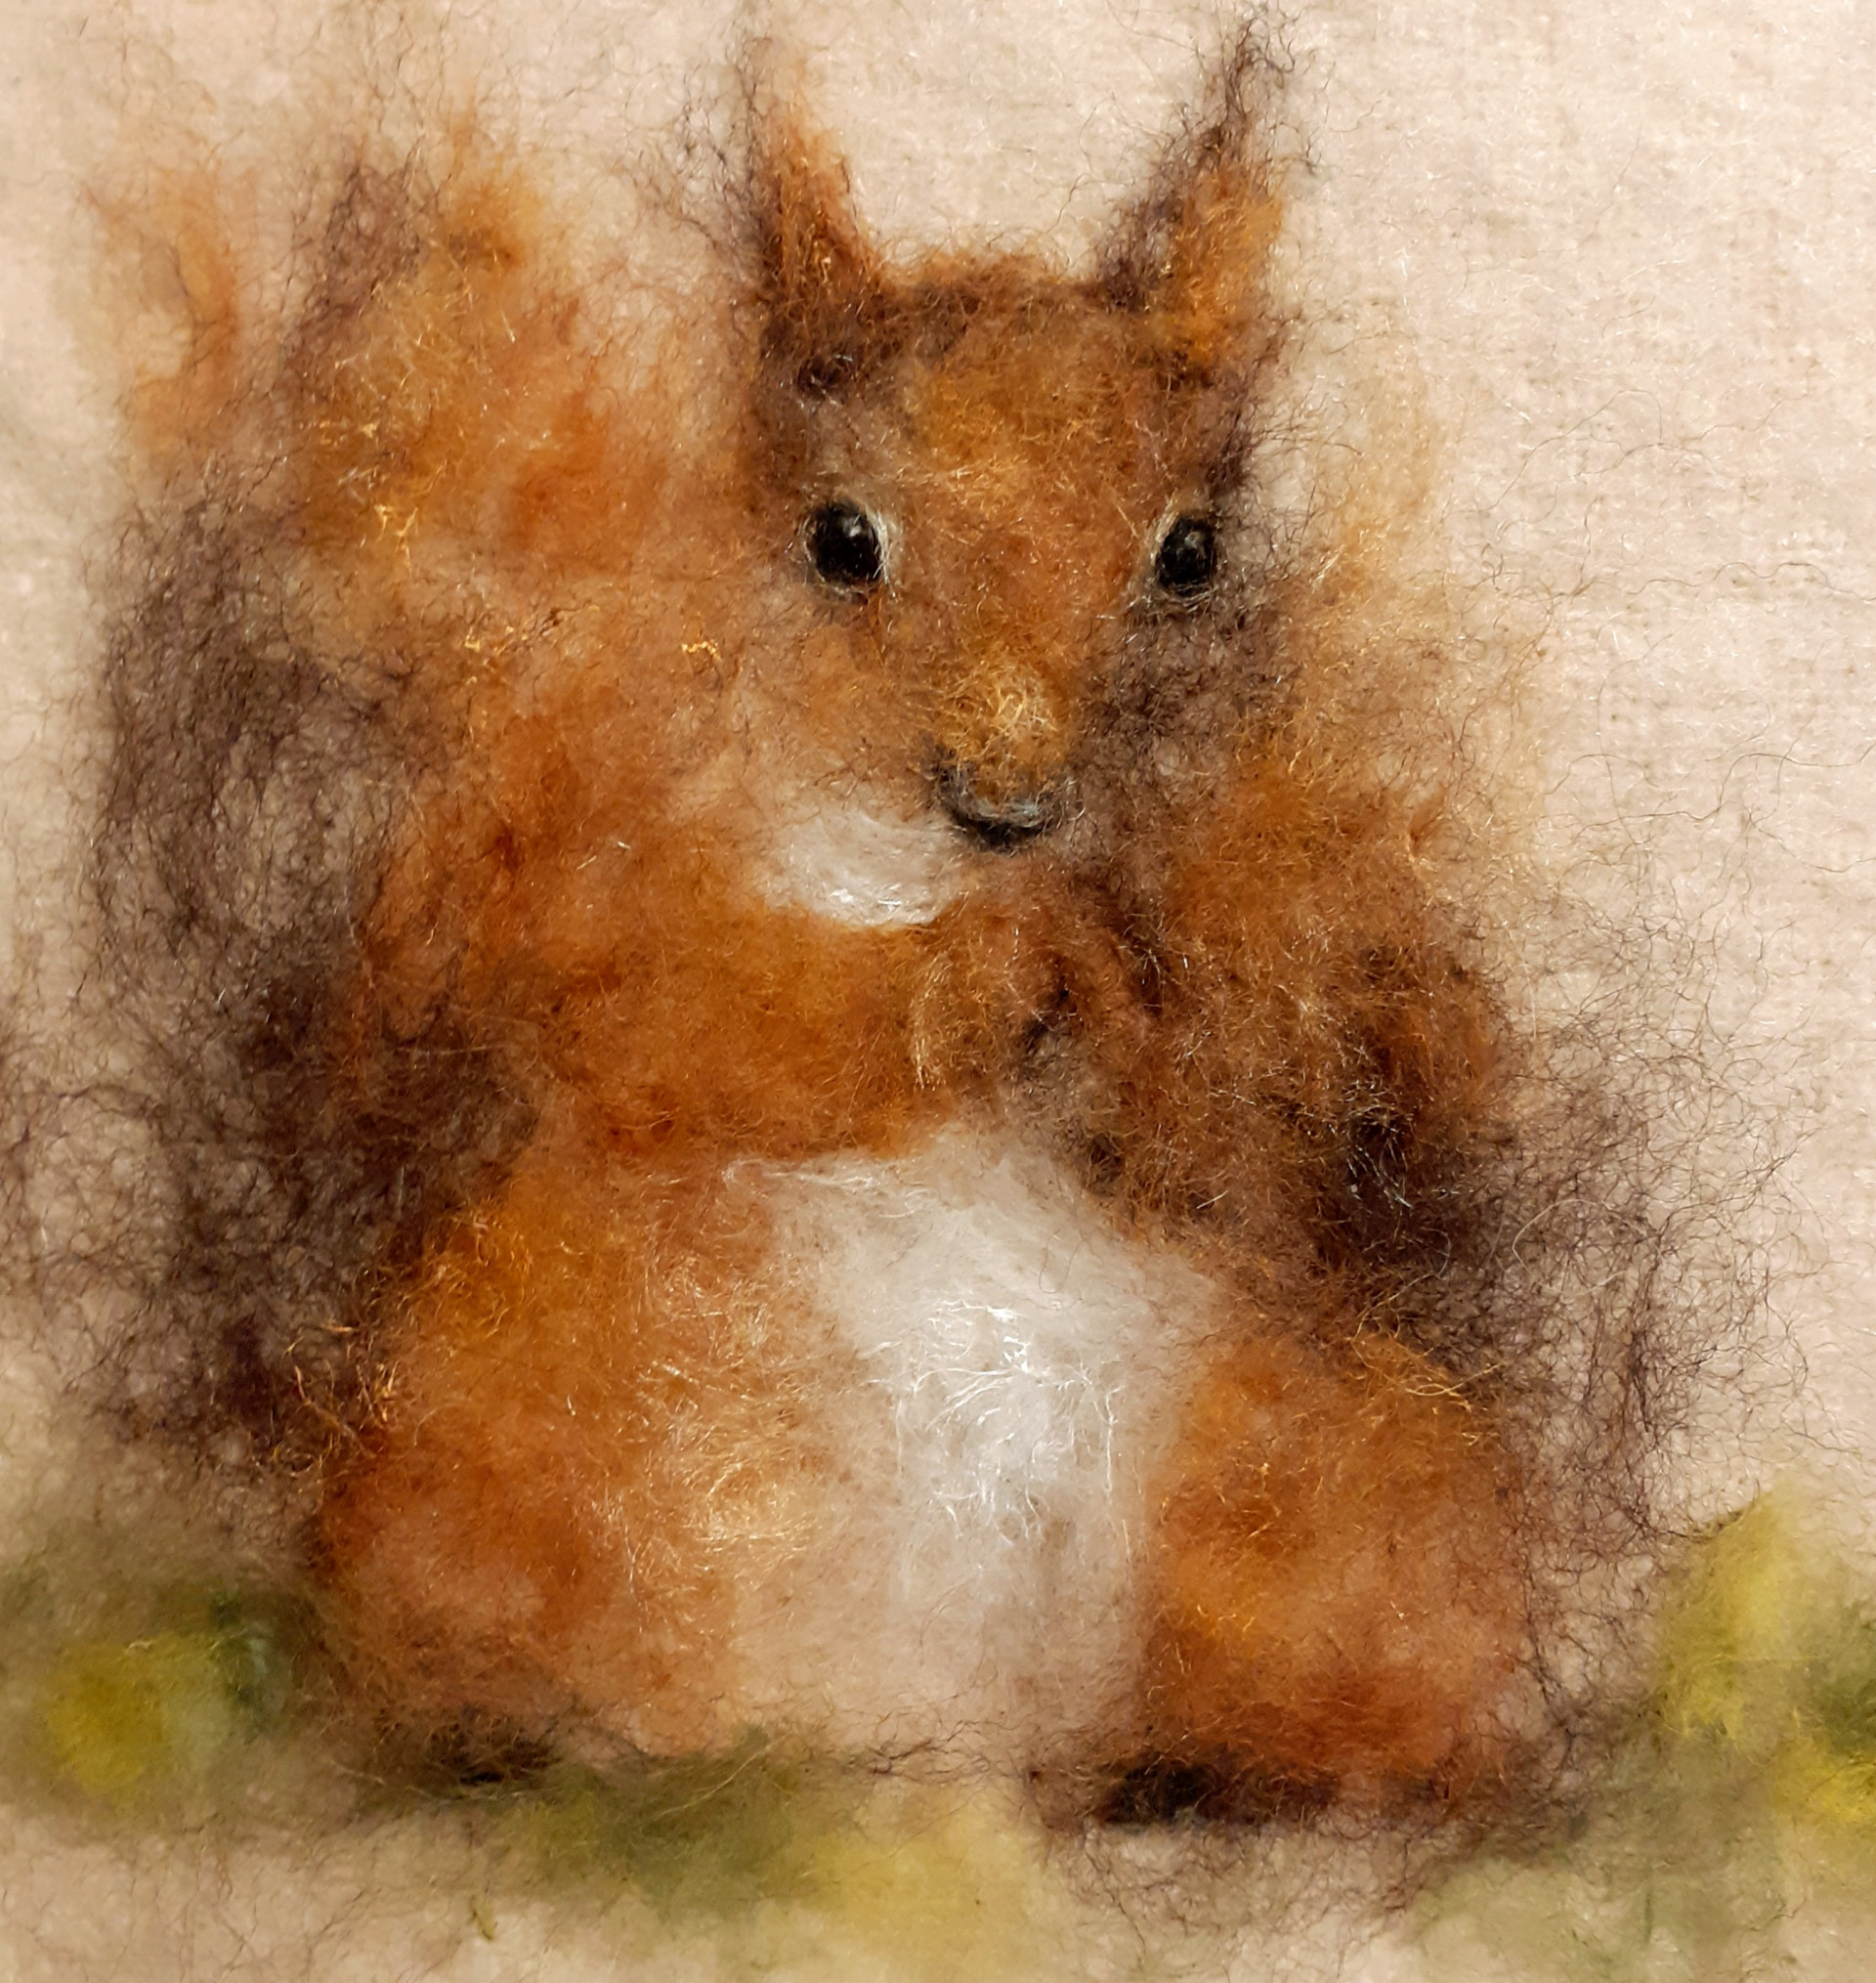 Art work of a red squirrel occupies most of the square Frame. The squirrel is looking towards the viewer with its front paws raised and held together.